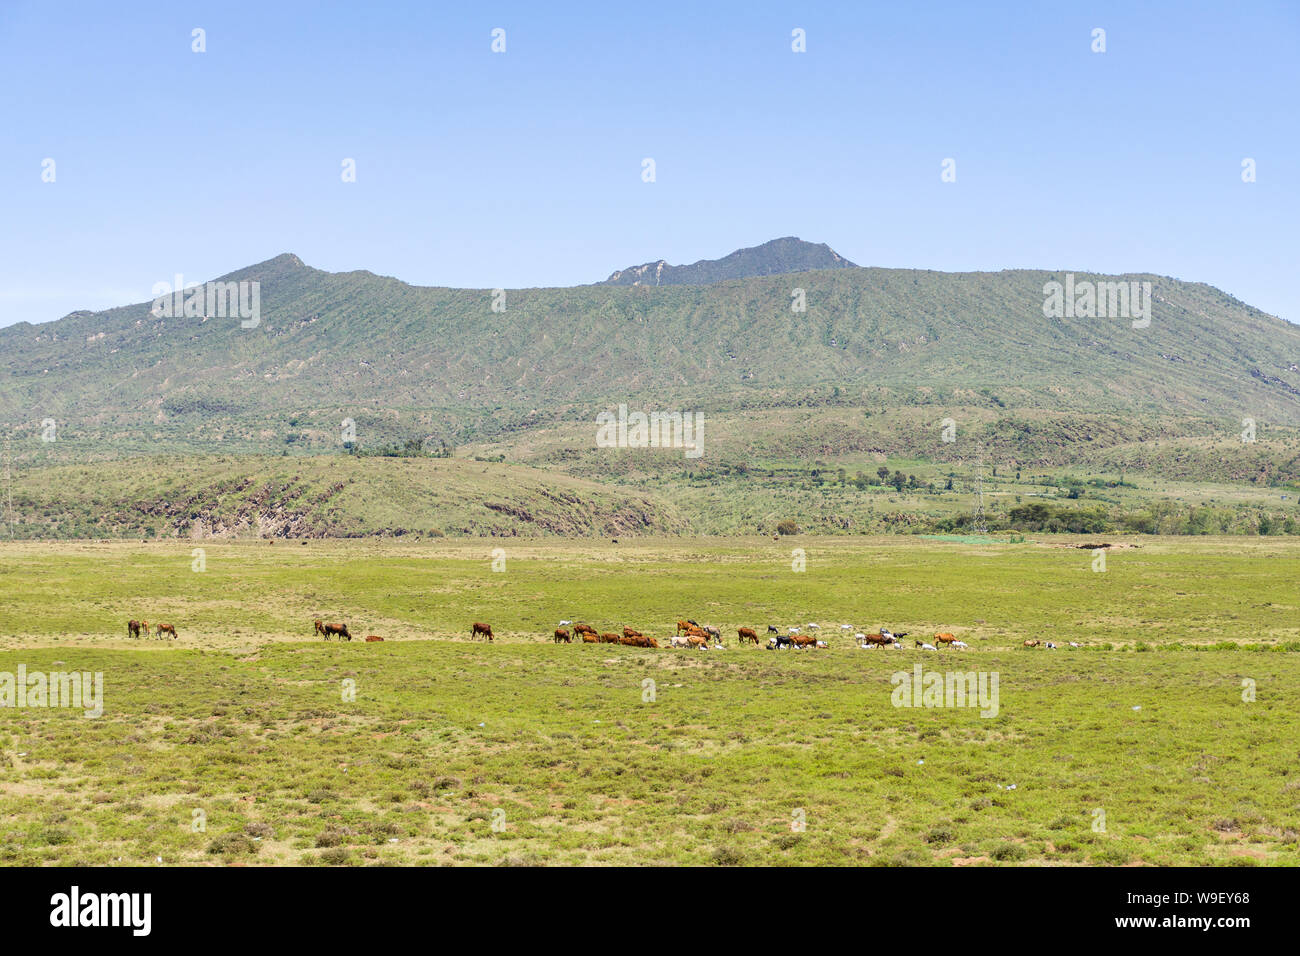 Mount Longonot extinct volcano with cattle in foreground, Kenya, East Africa Stock Photo